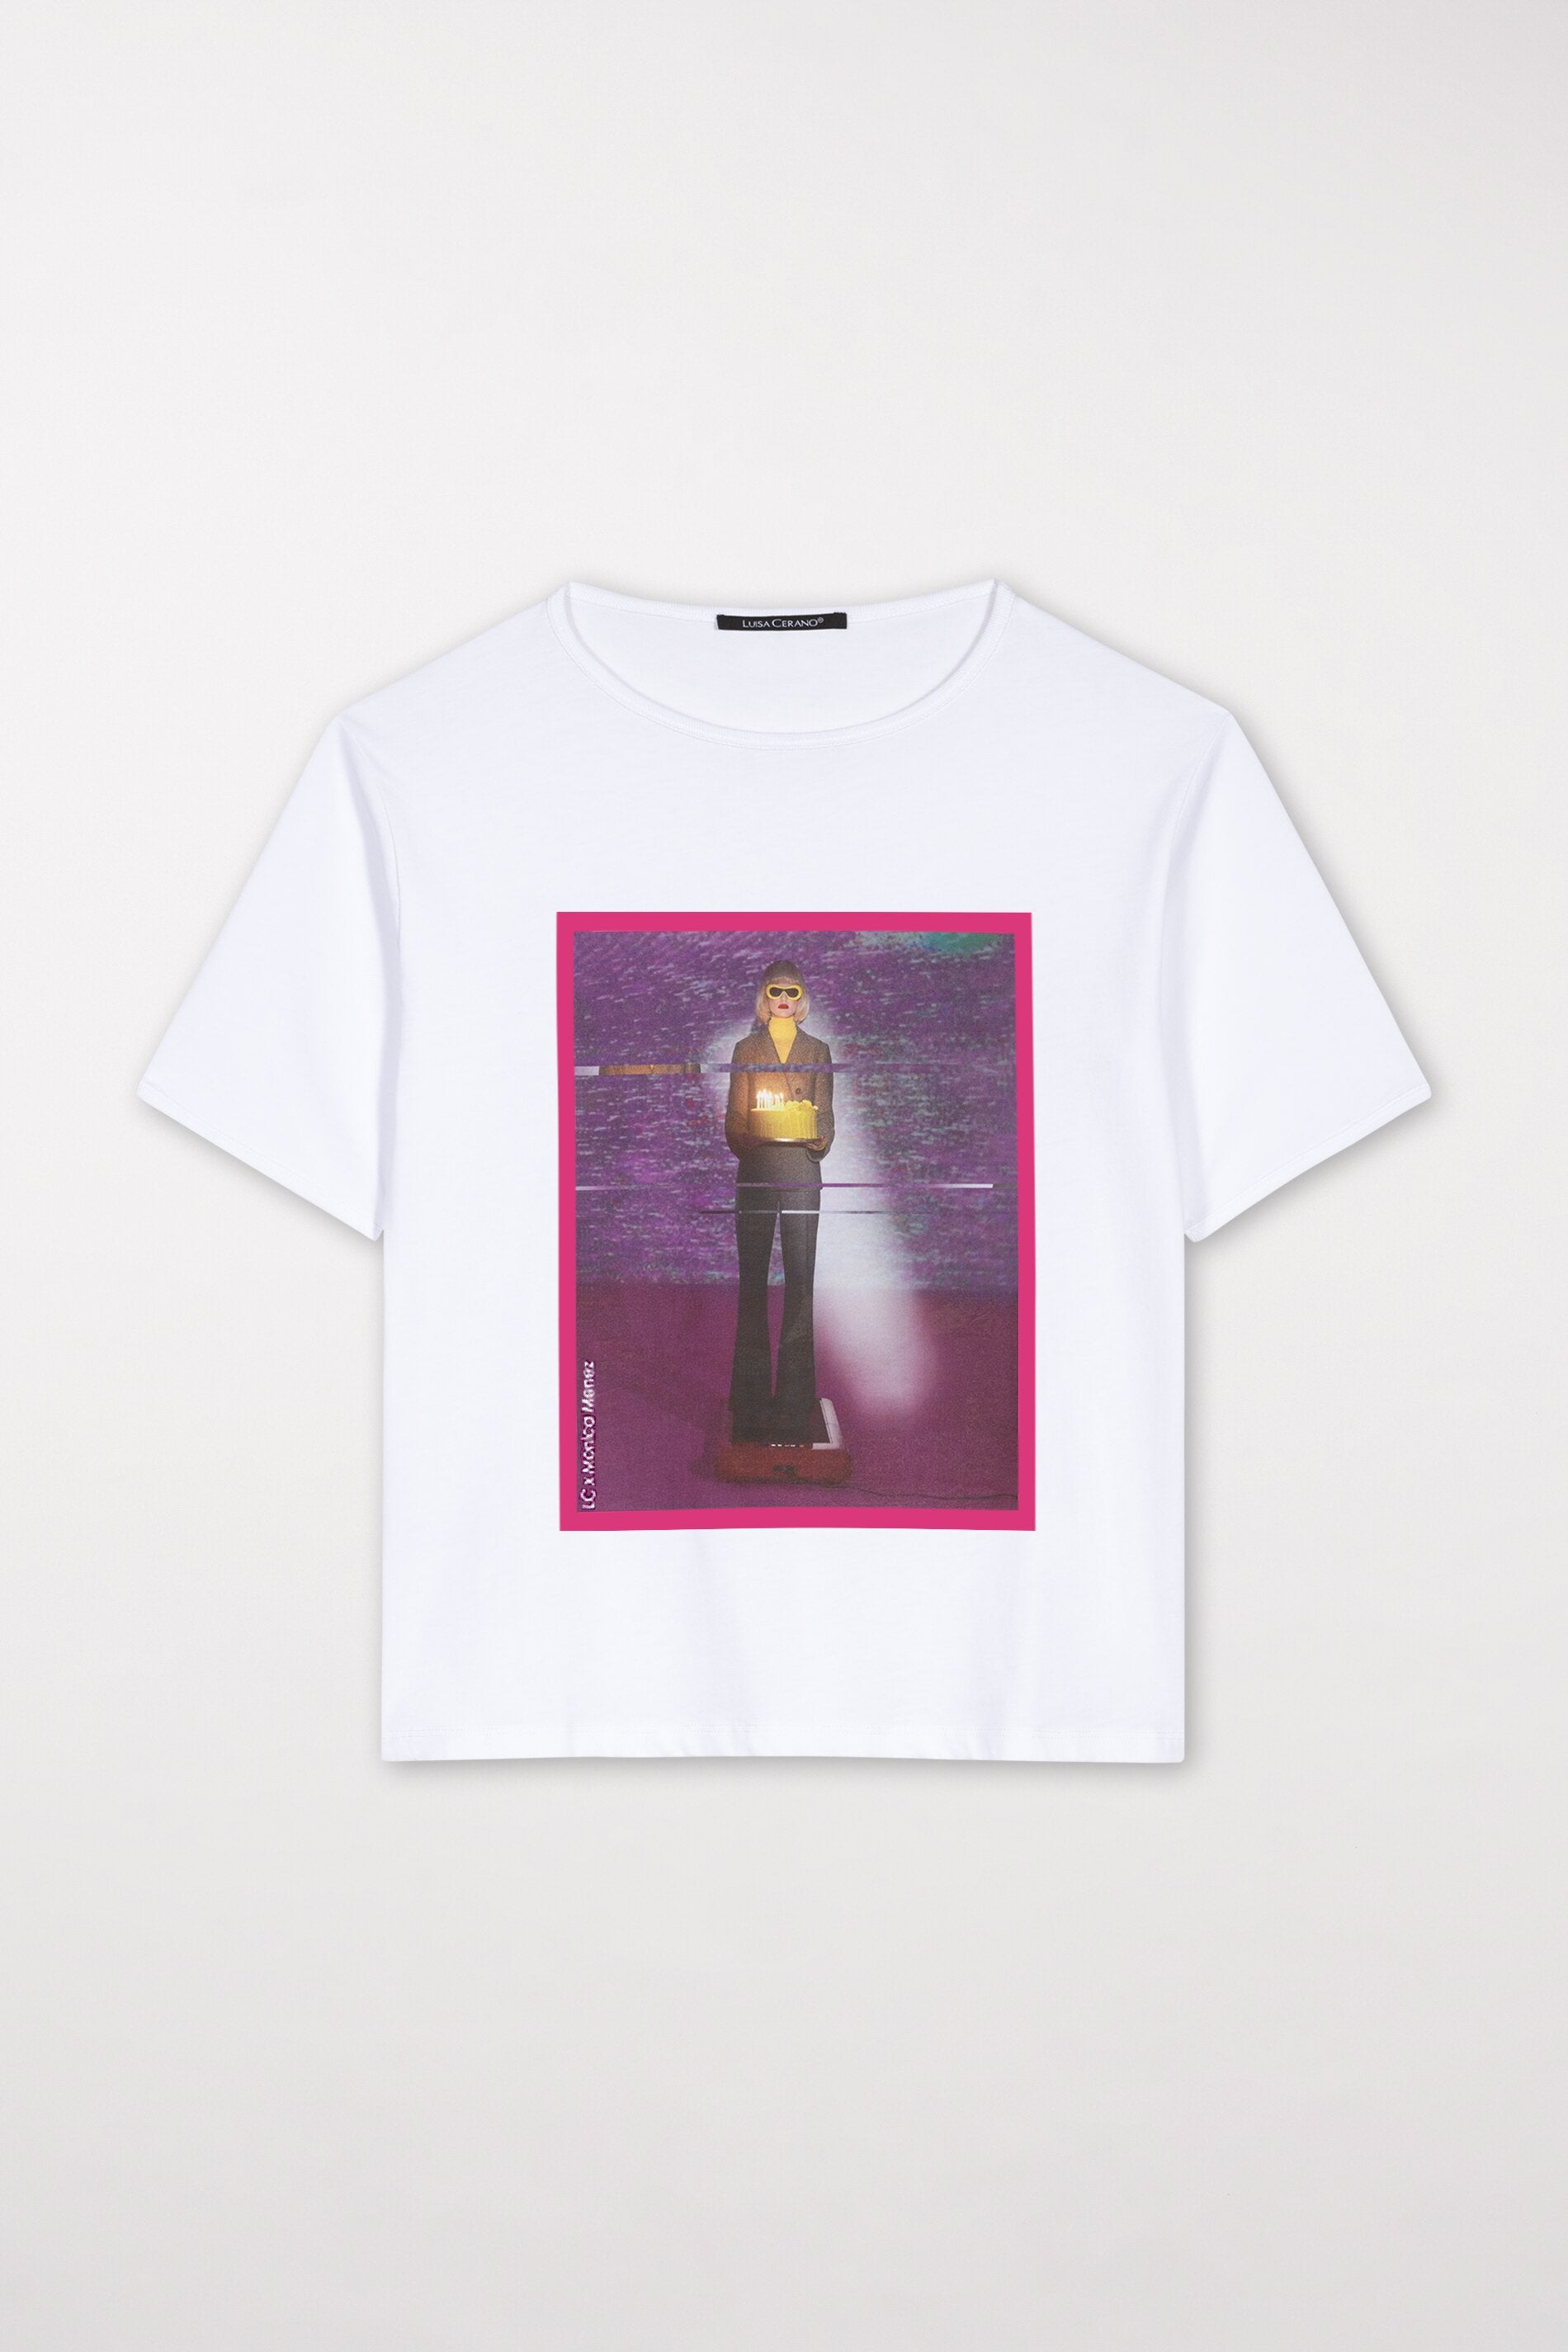 LUISA CERANO-OUTLET-SALE-T-Shirt "Anniversary 25 years"-Shirts-by-ARCHIVIST